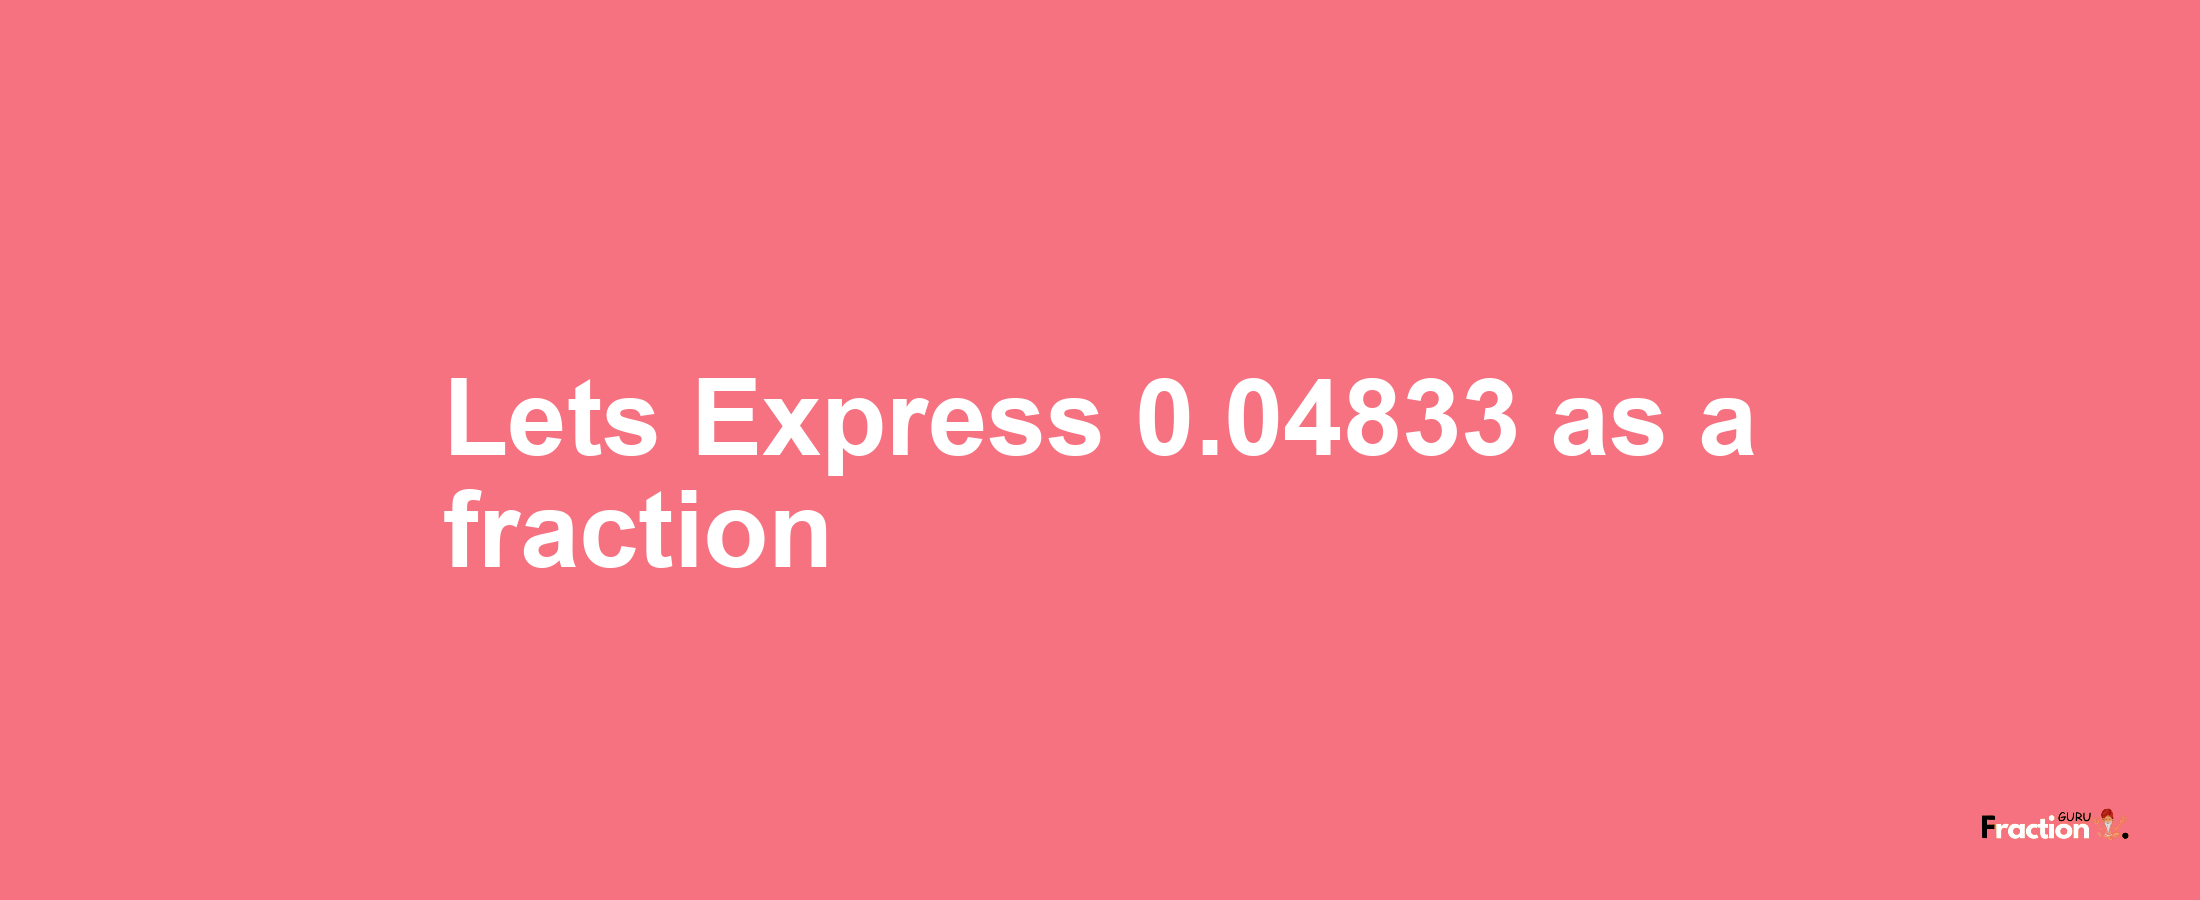 Lets Express 0.04833 as afraction